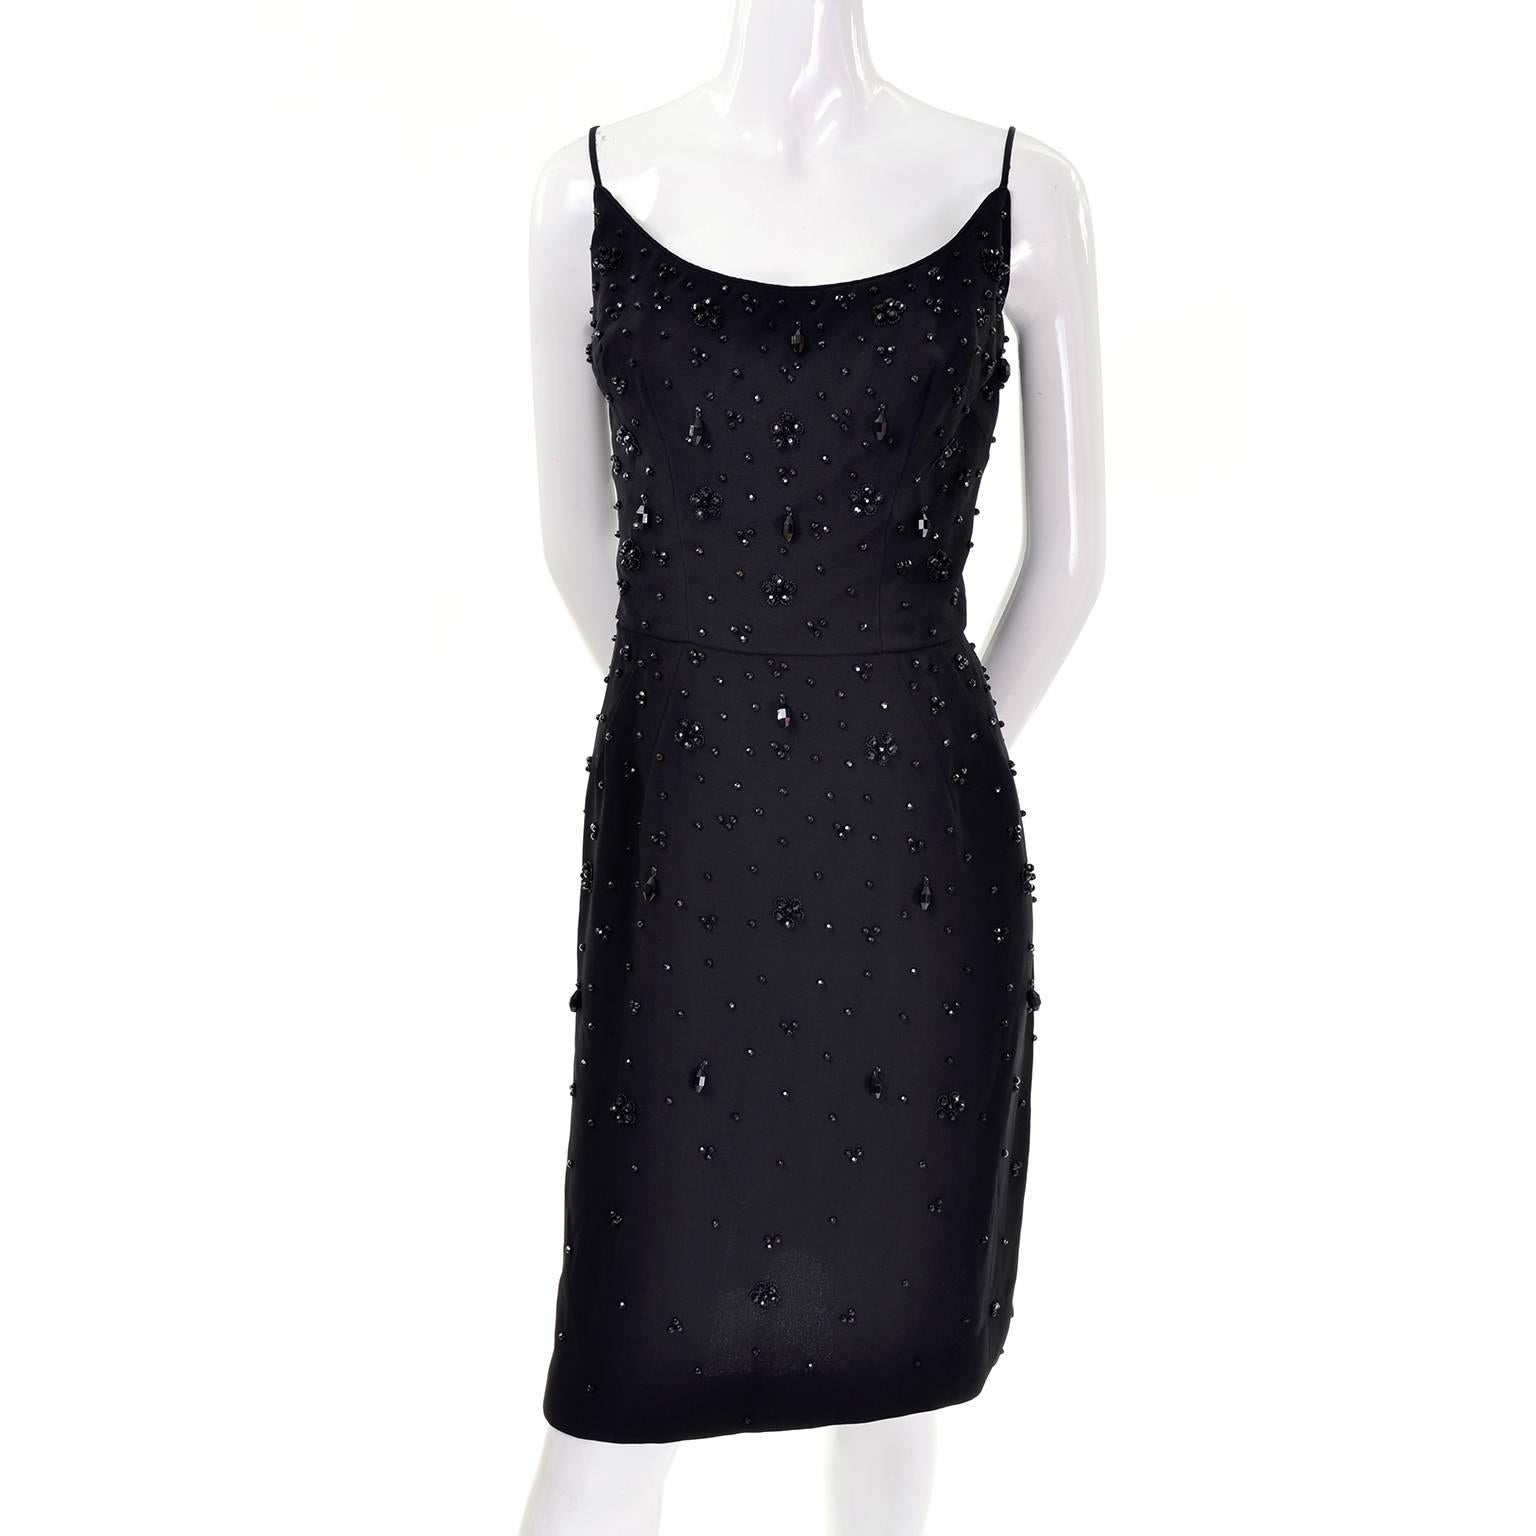 This is a sexy 1960's sleeveless black crepe cocktail dress that is dripping with faceted black beads in a variety of sizes. This great little black dress has spaghetti straps, a fitted waist and a back zipper.  We estimate this dress to fit a